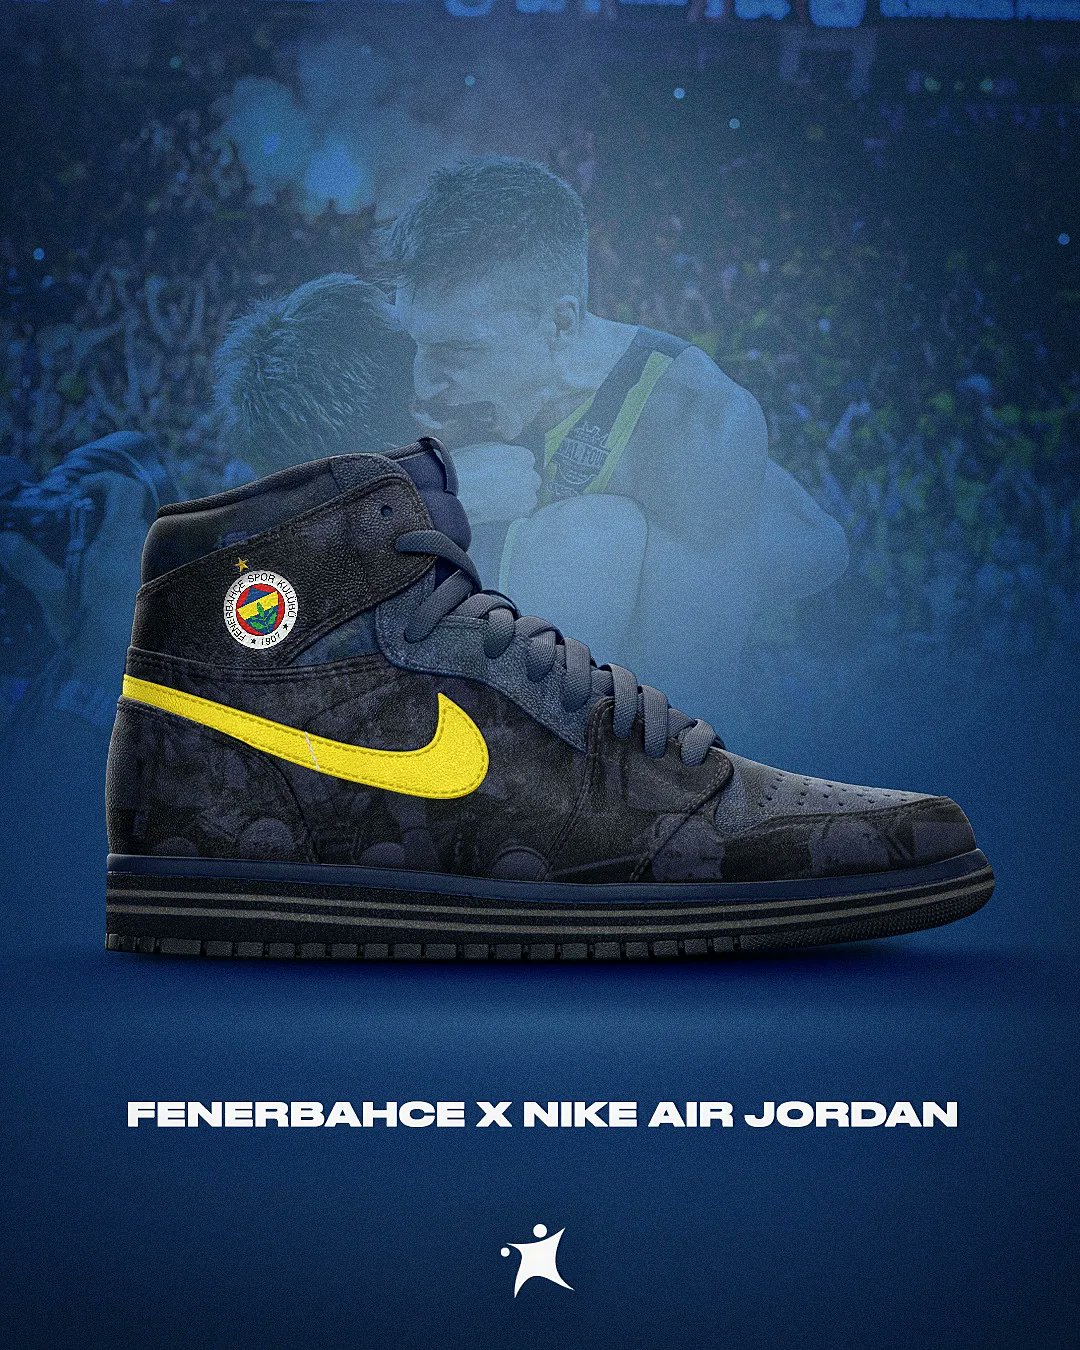 BasketNews on Twitter: "If Fenerbahce had their signature Nike Jordan's  🇹🇷🟡 Would you cop? 🤑 https://t.co/MzxH1aQXnY" / Twitter